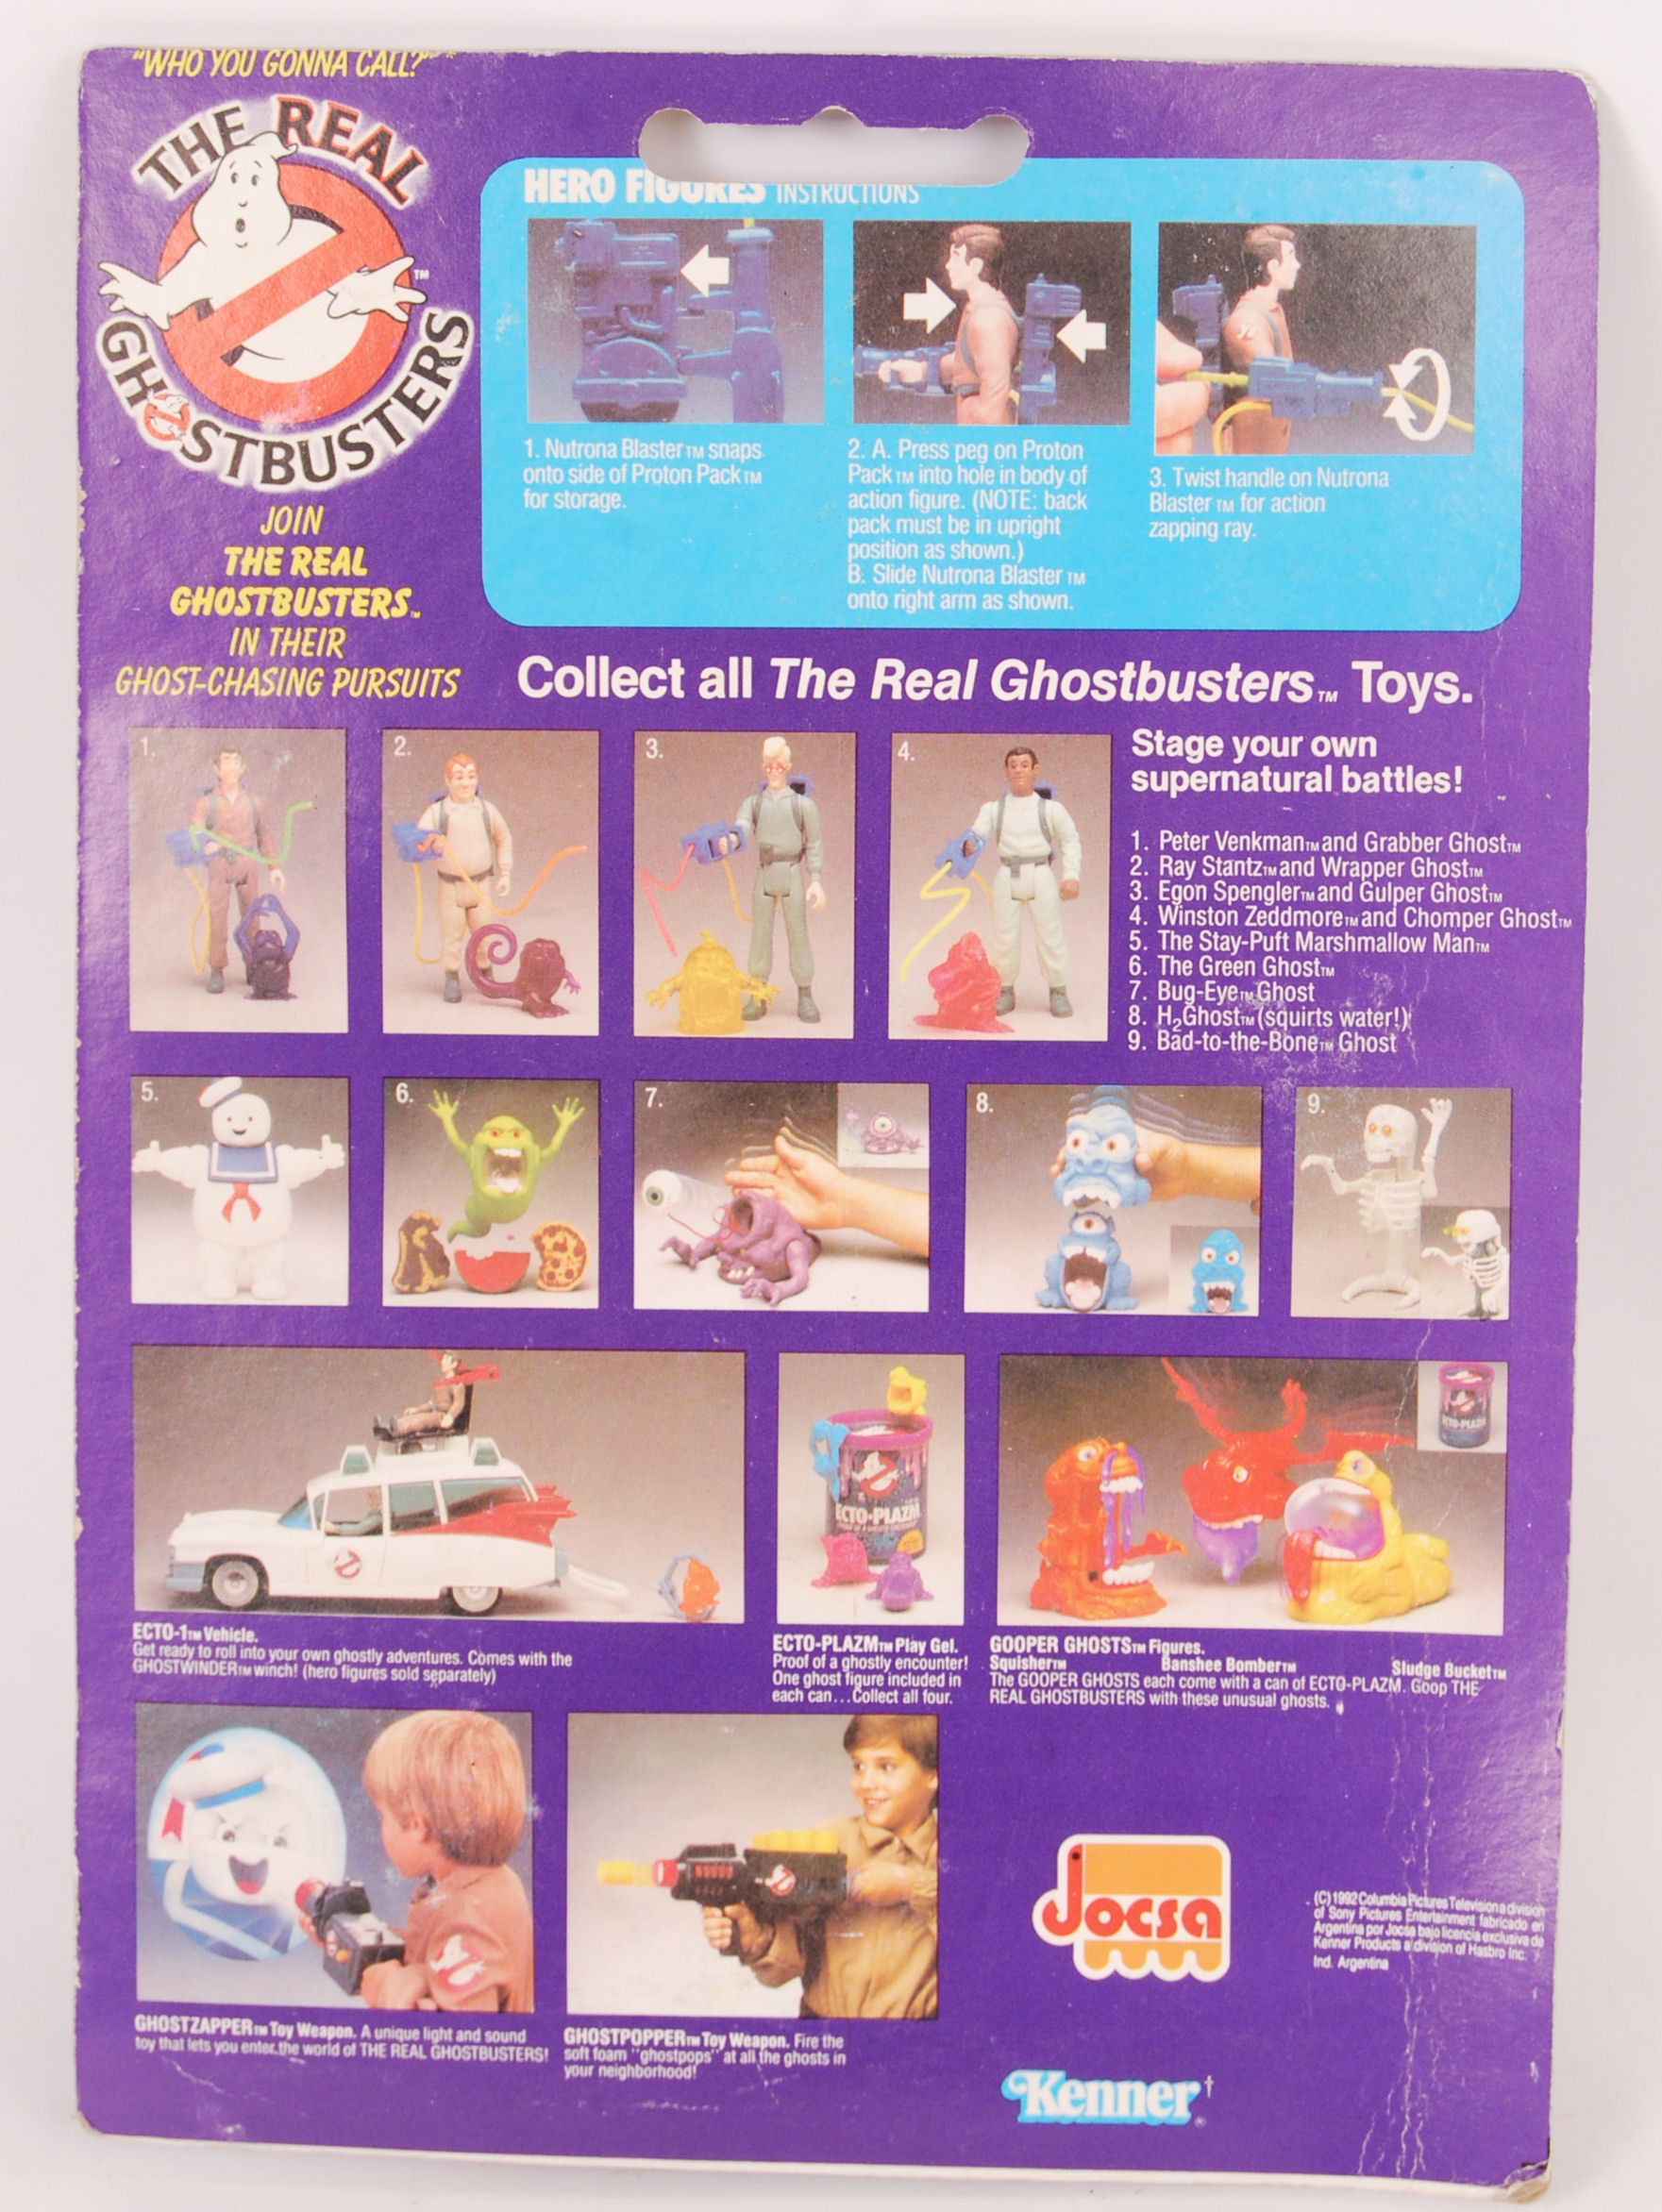 THE REAL GHOSTBUSTERS - Image 2 of 4